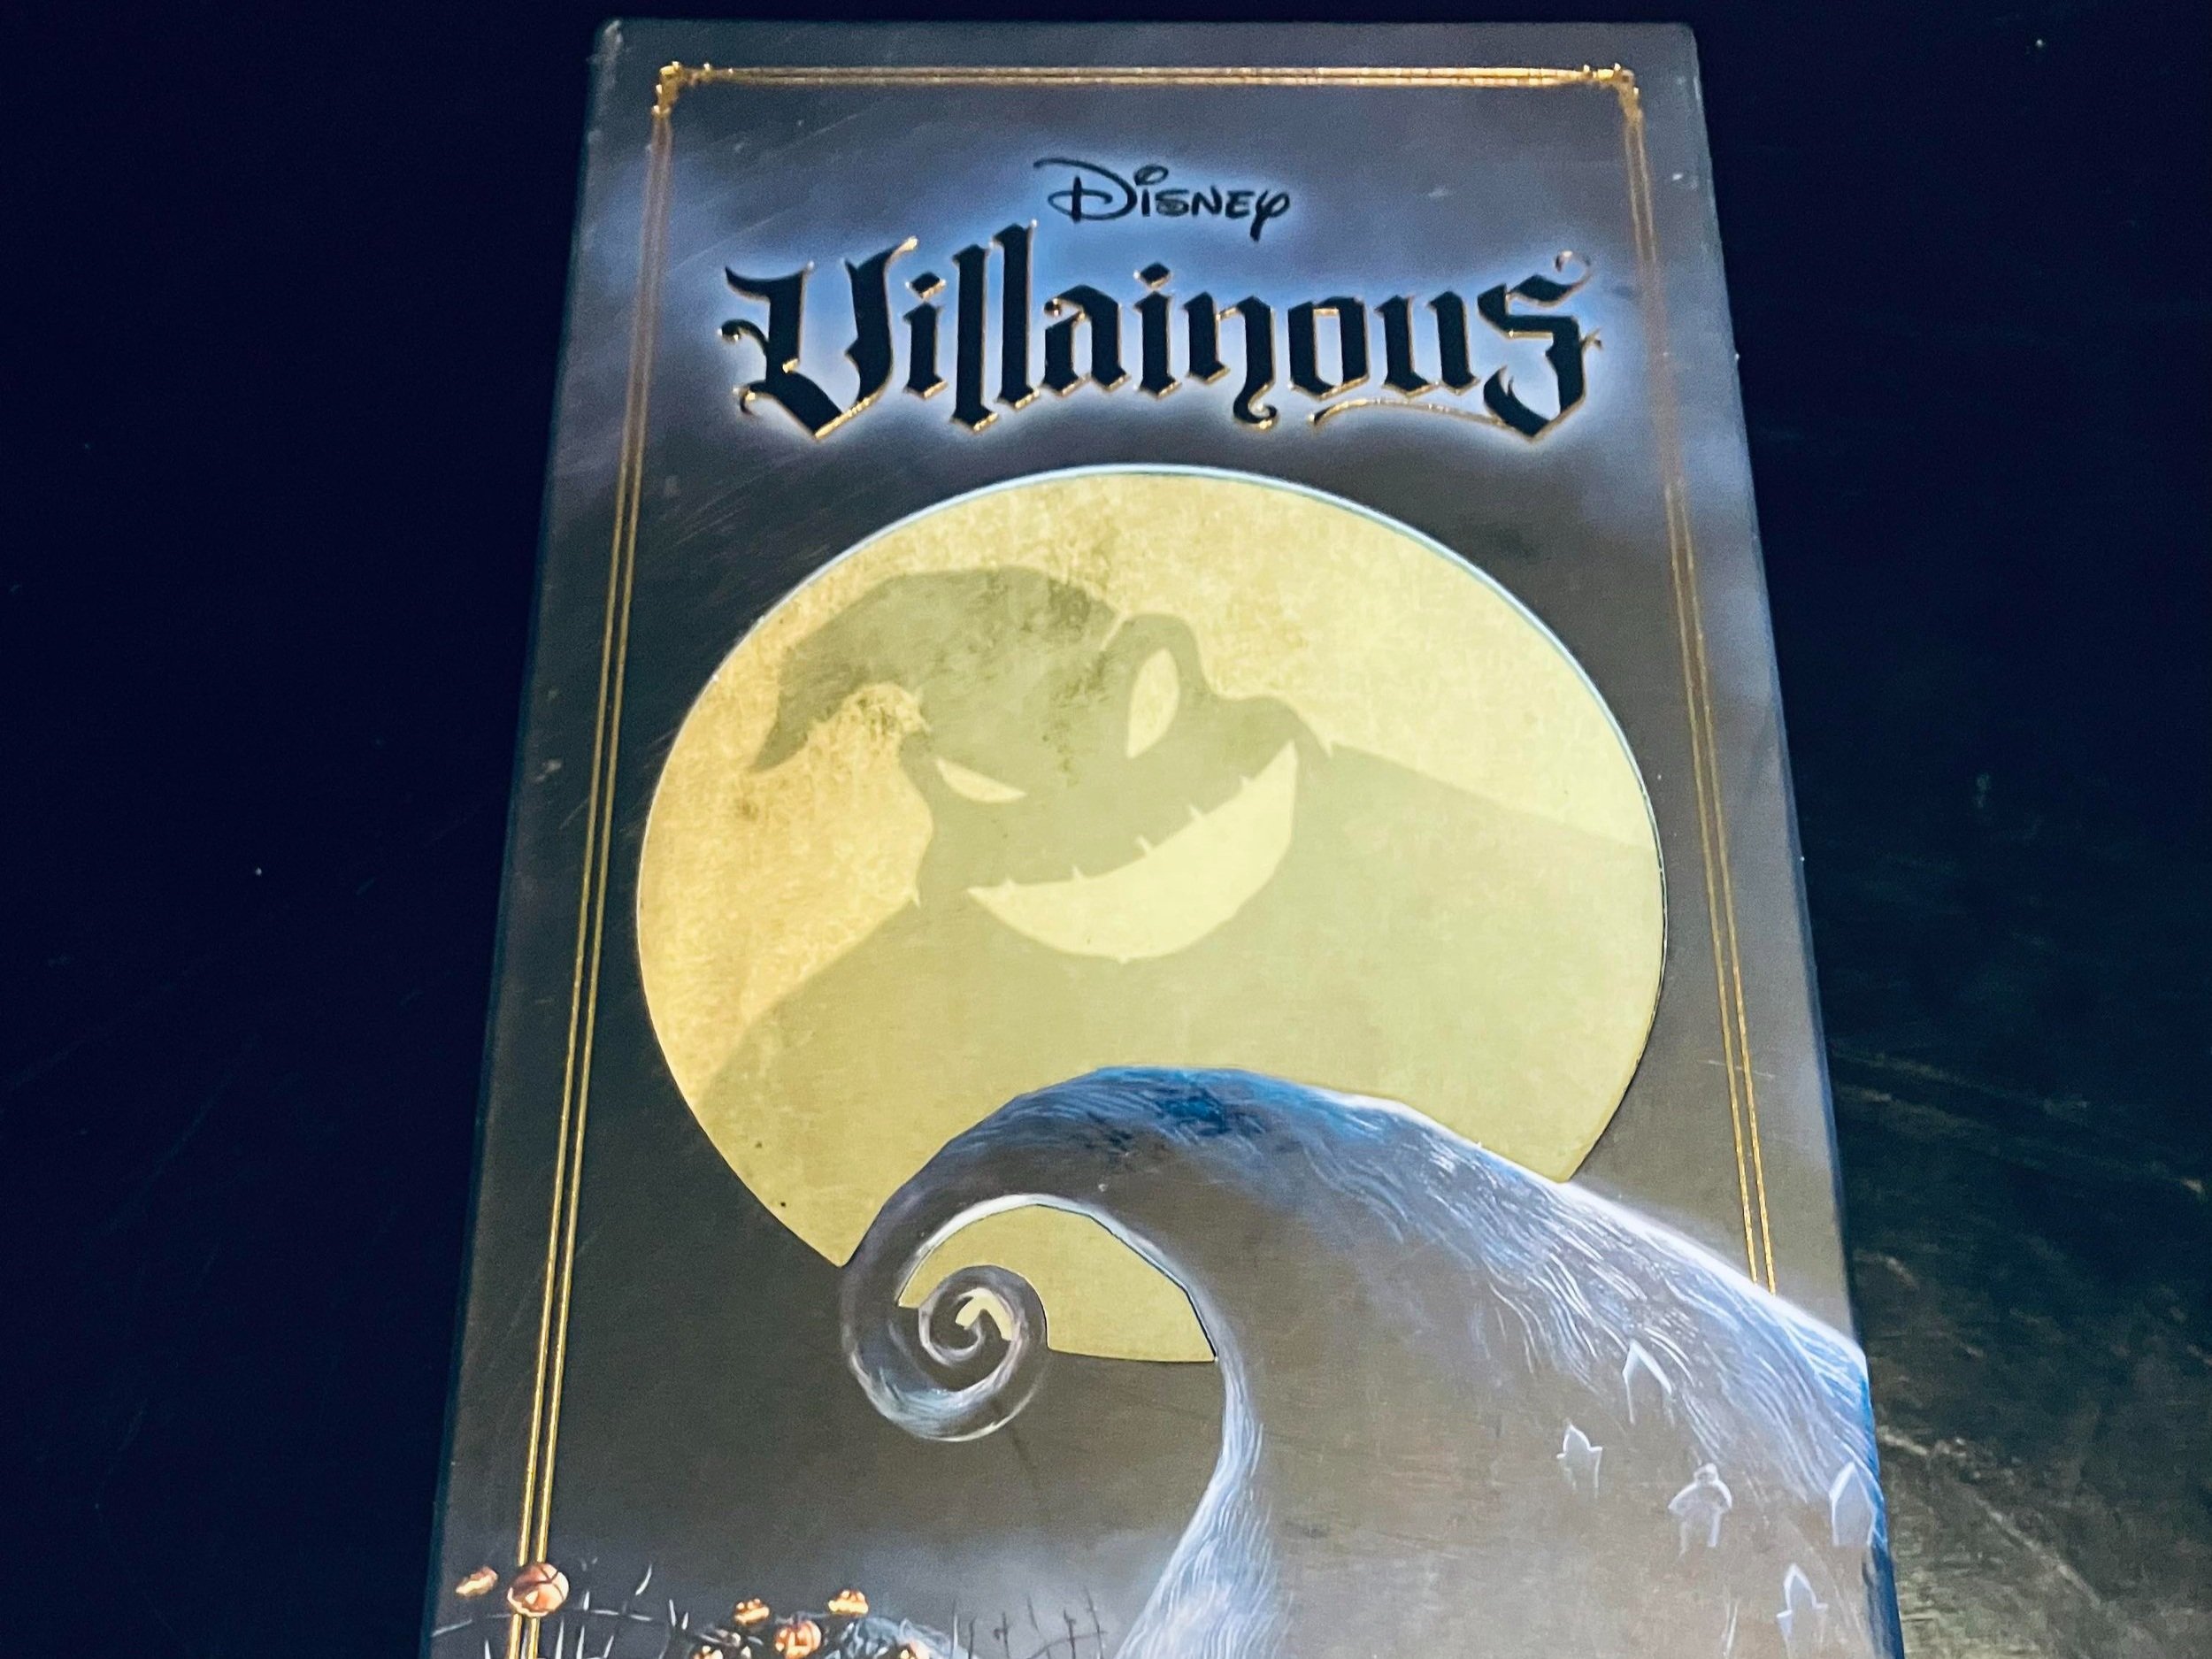 How to Play Oogie Boogie – Disney Villainous Strategy Guide